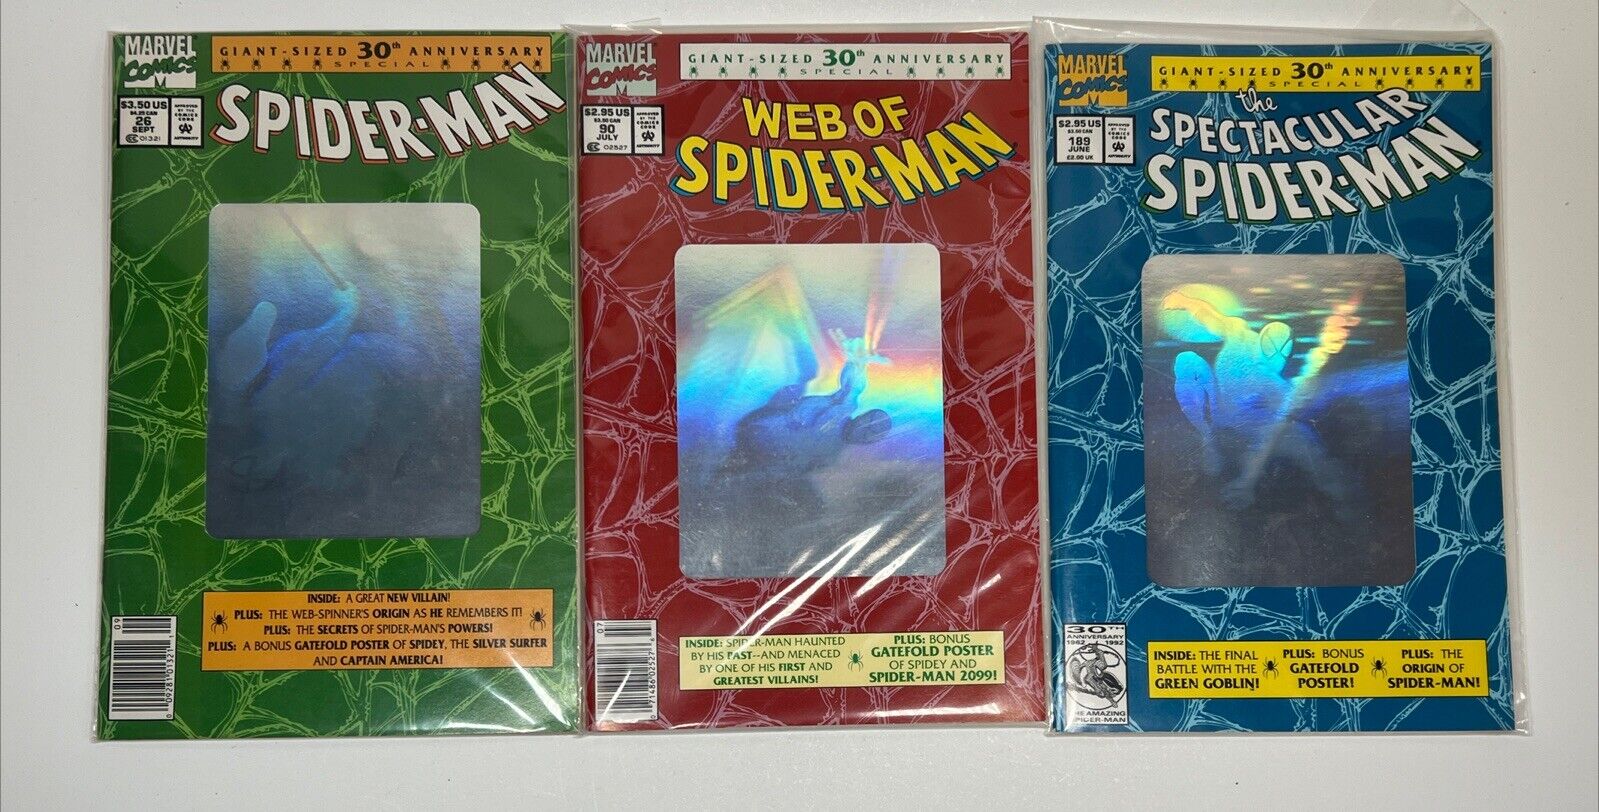 Spider-man Lot of 3 1st print Silver Anniversary Hologram Issues 1992